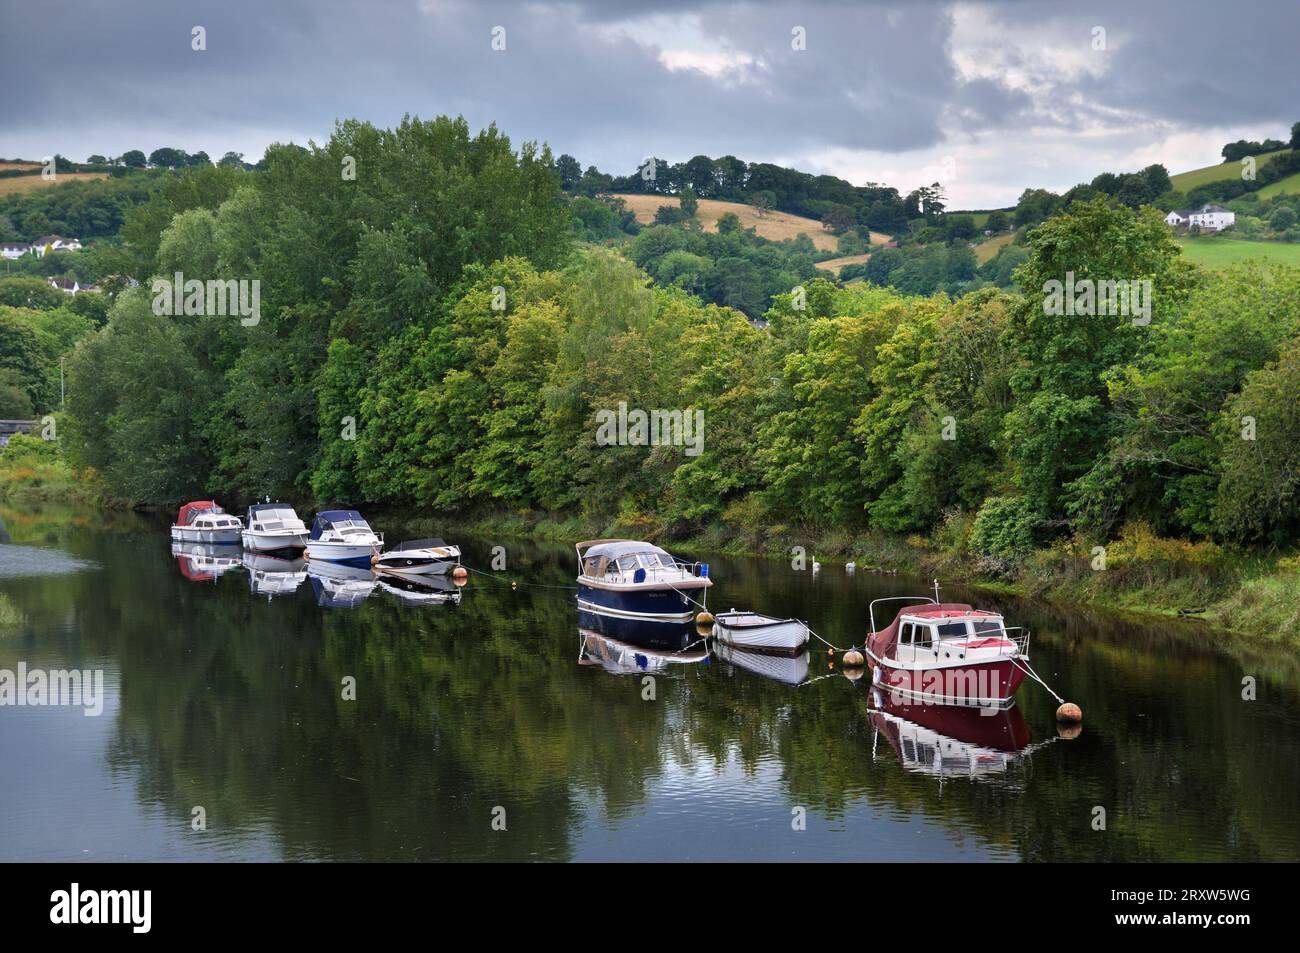 Line of boats moored on the River Dart with trees and rolling hills landscape on a cloudy day in summer. Totnes, South Hams, South Devon, England, UK Stock Photo